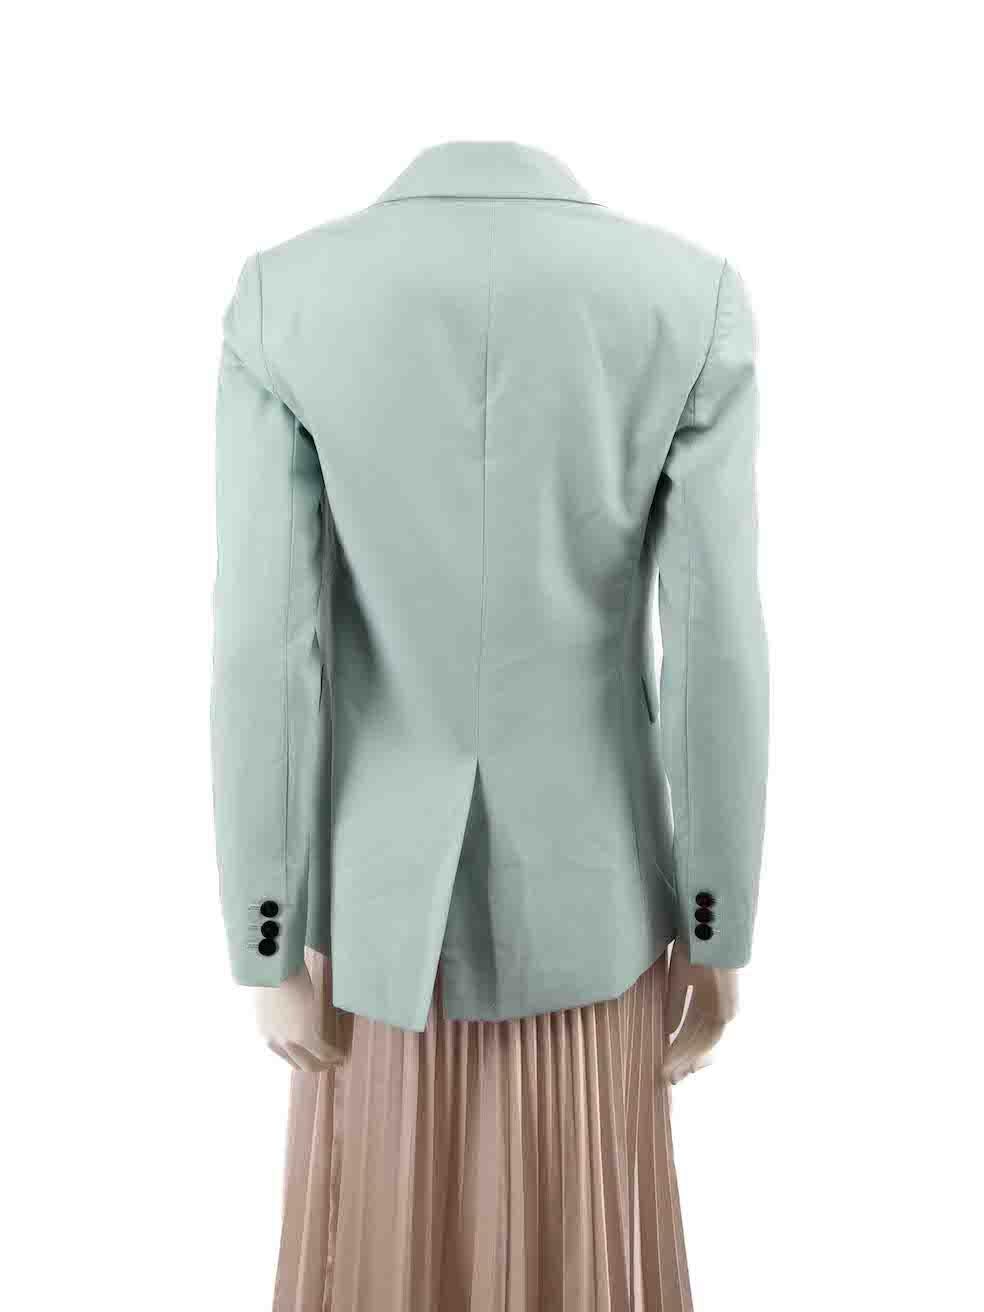 Theory Light Turquoise Wool Blazer Size S In Good Condition For Sale In London, GB